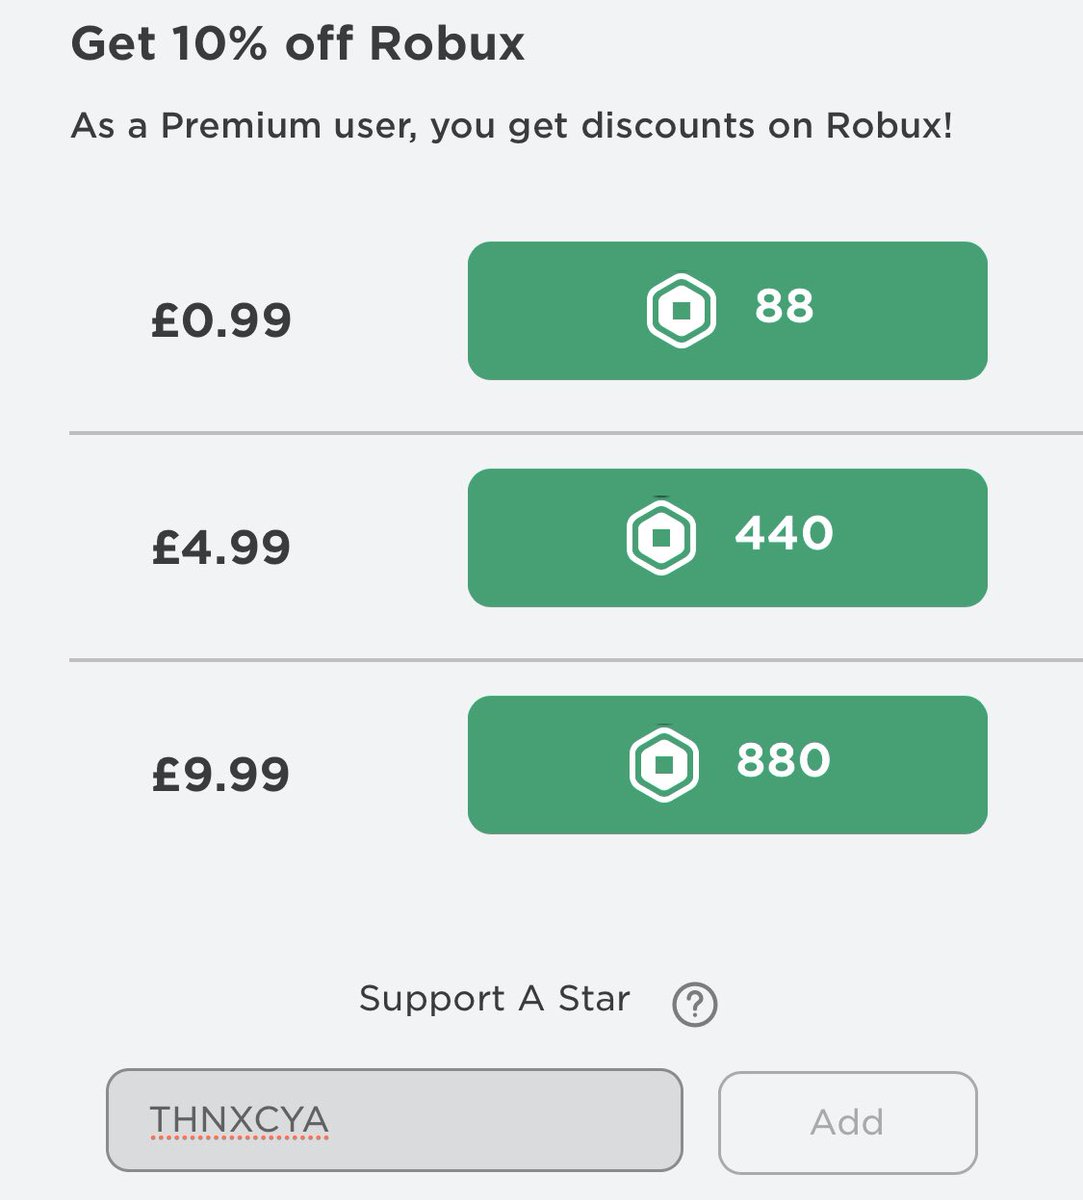 ThnxCya on X: Roblox added Star Codes to mobile app! Hugeee